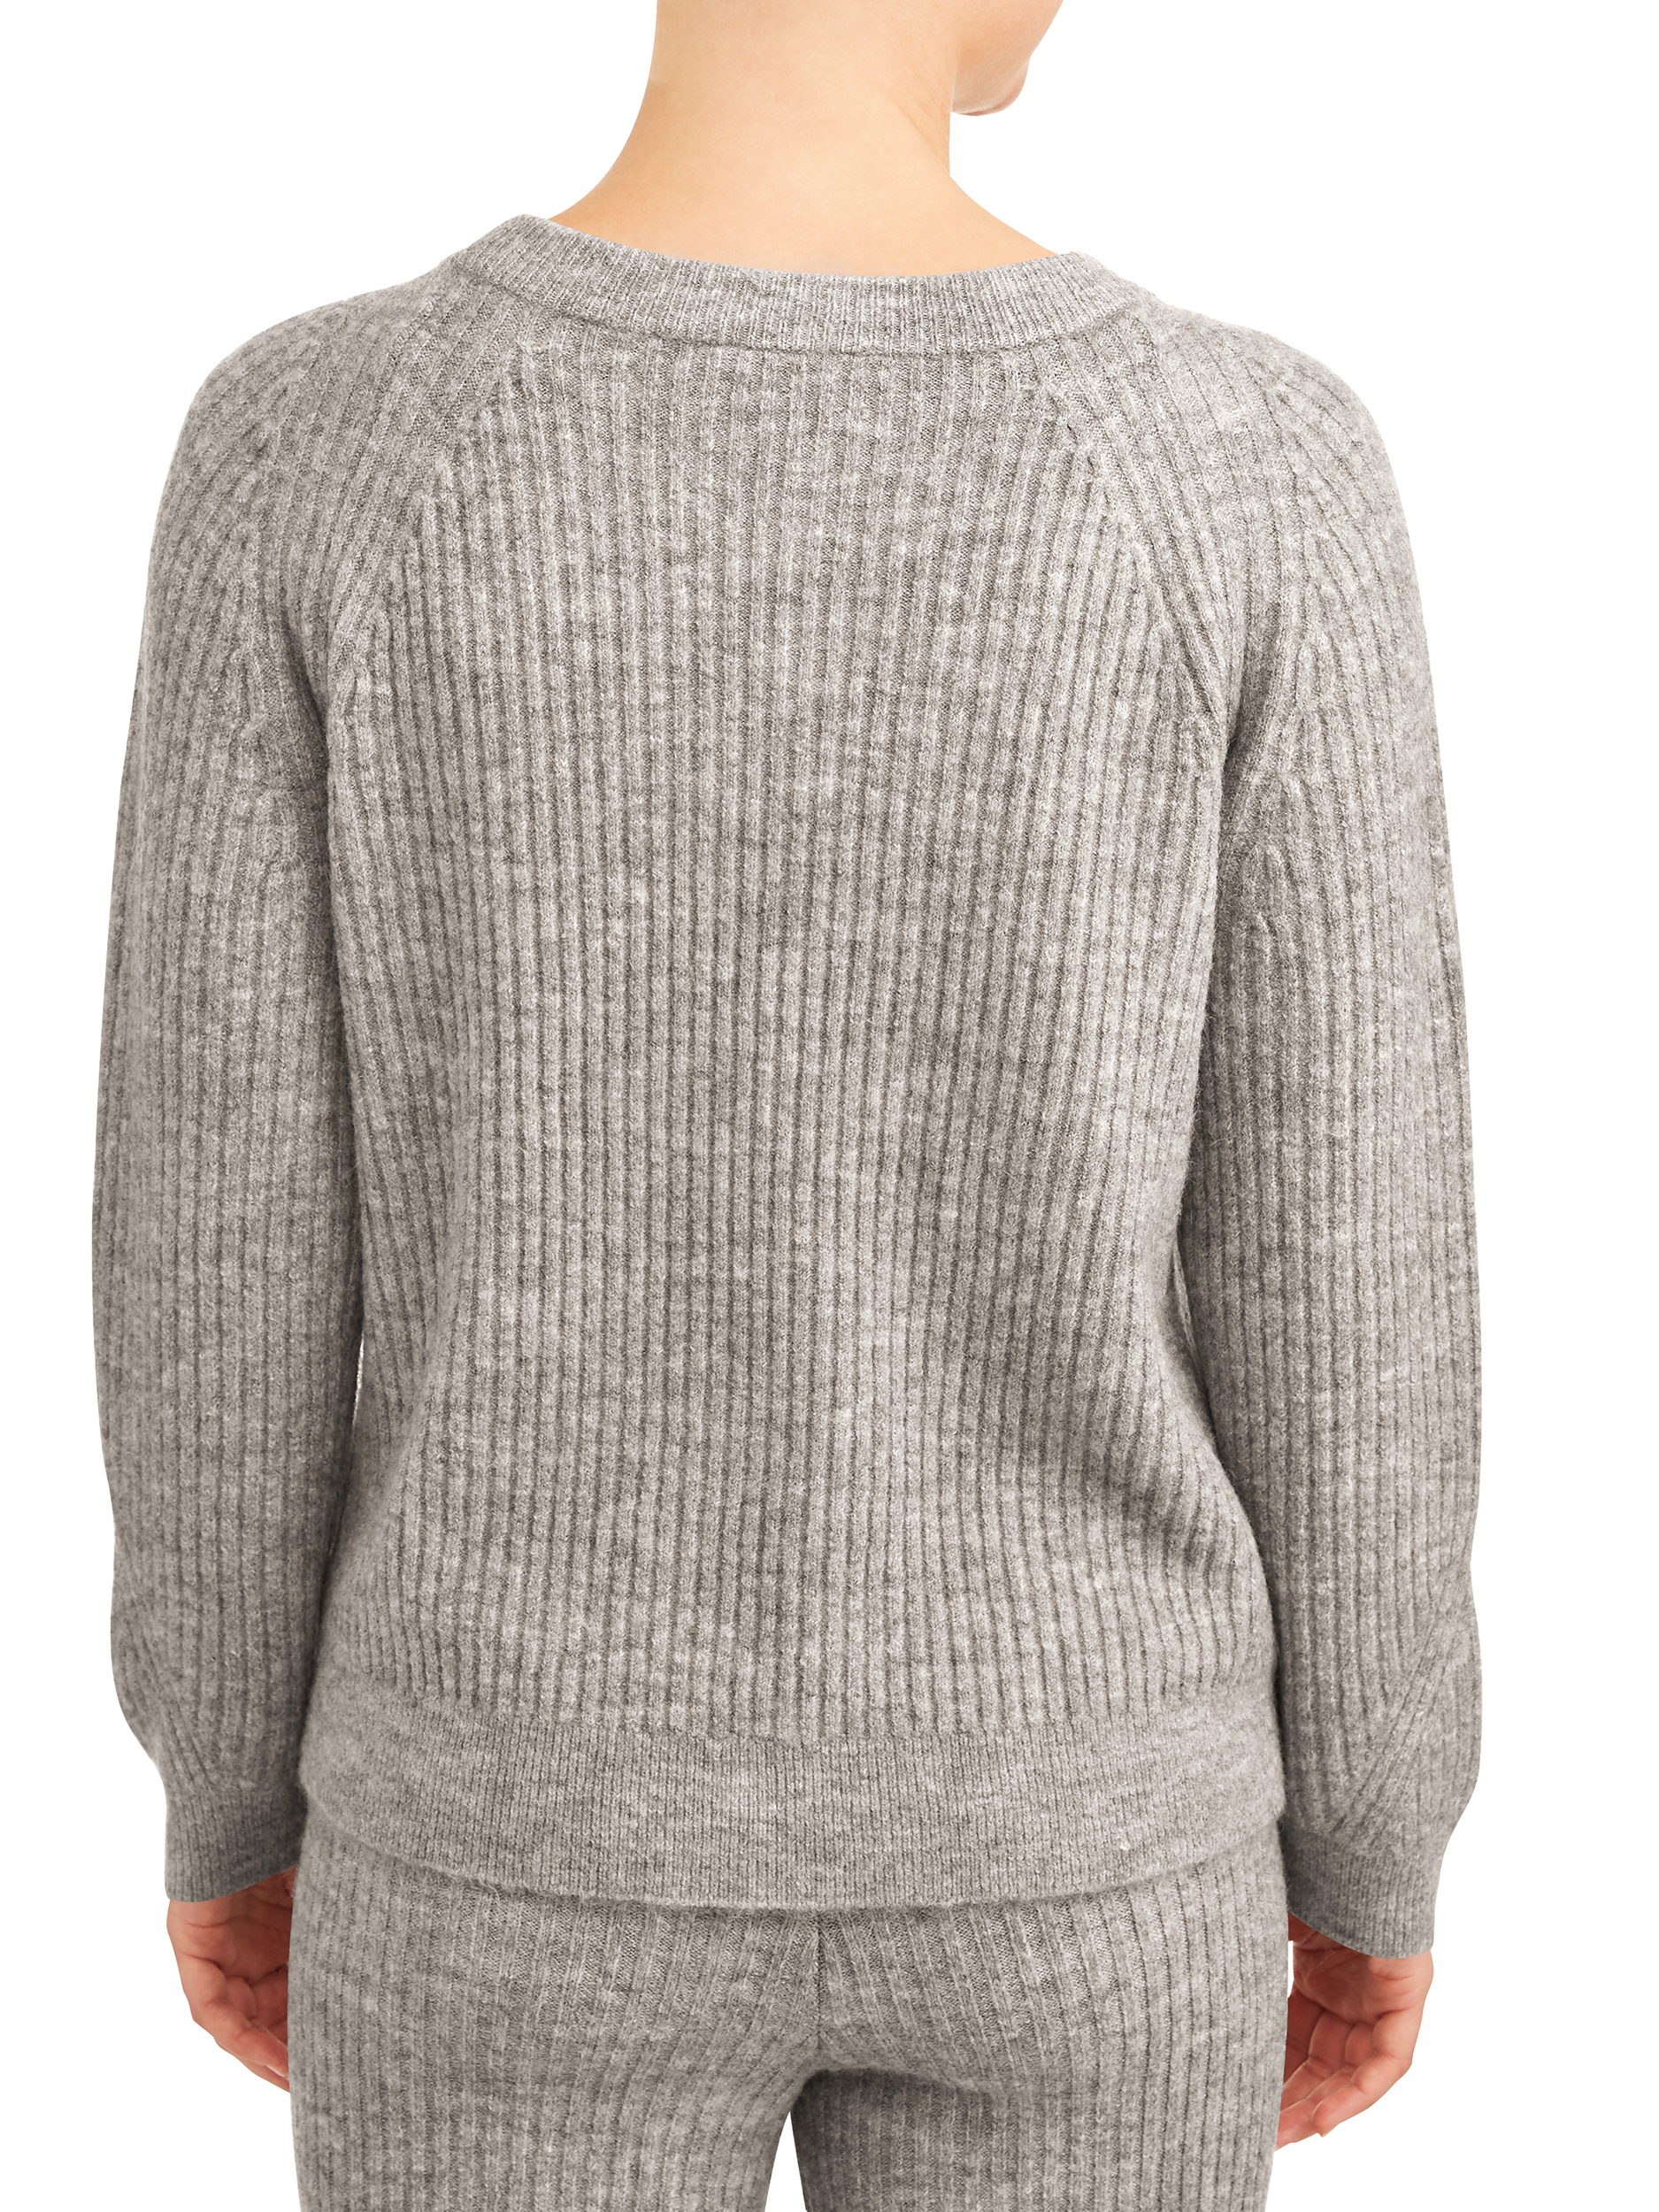 Time and Tru Women's Cozy Ribbed Sweater - image 5 of 5